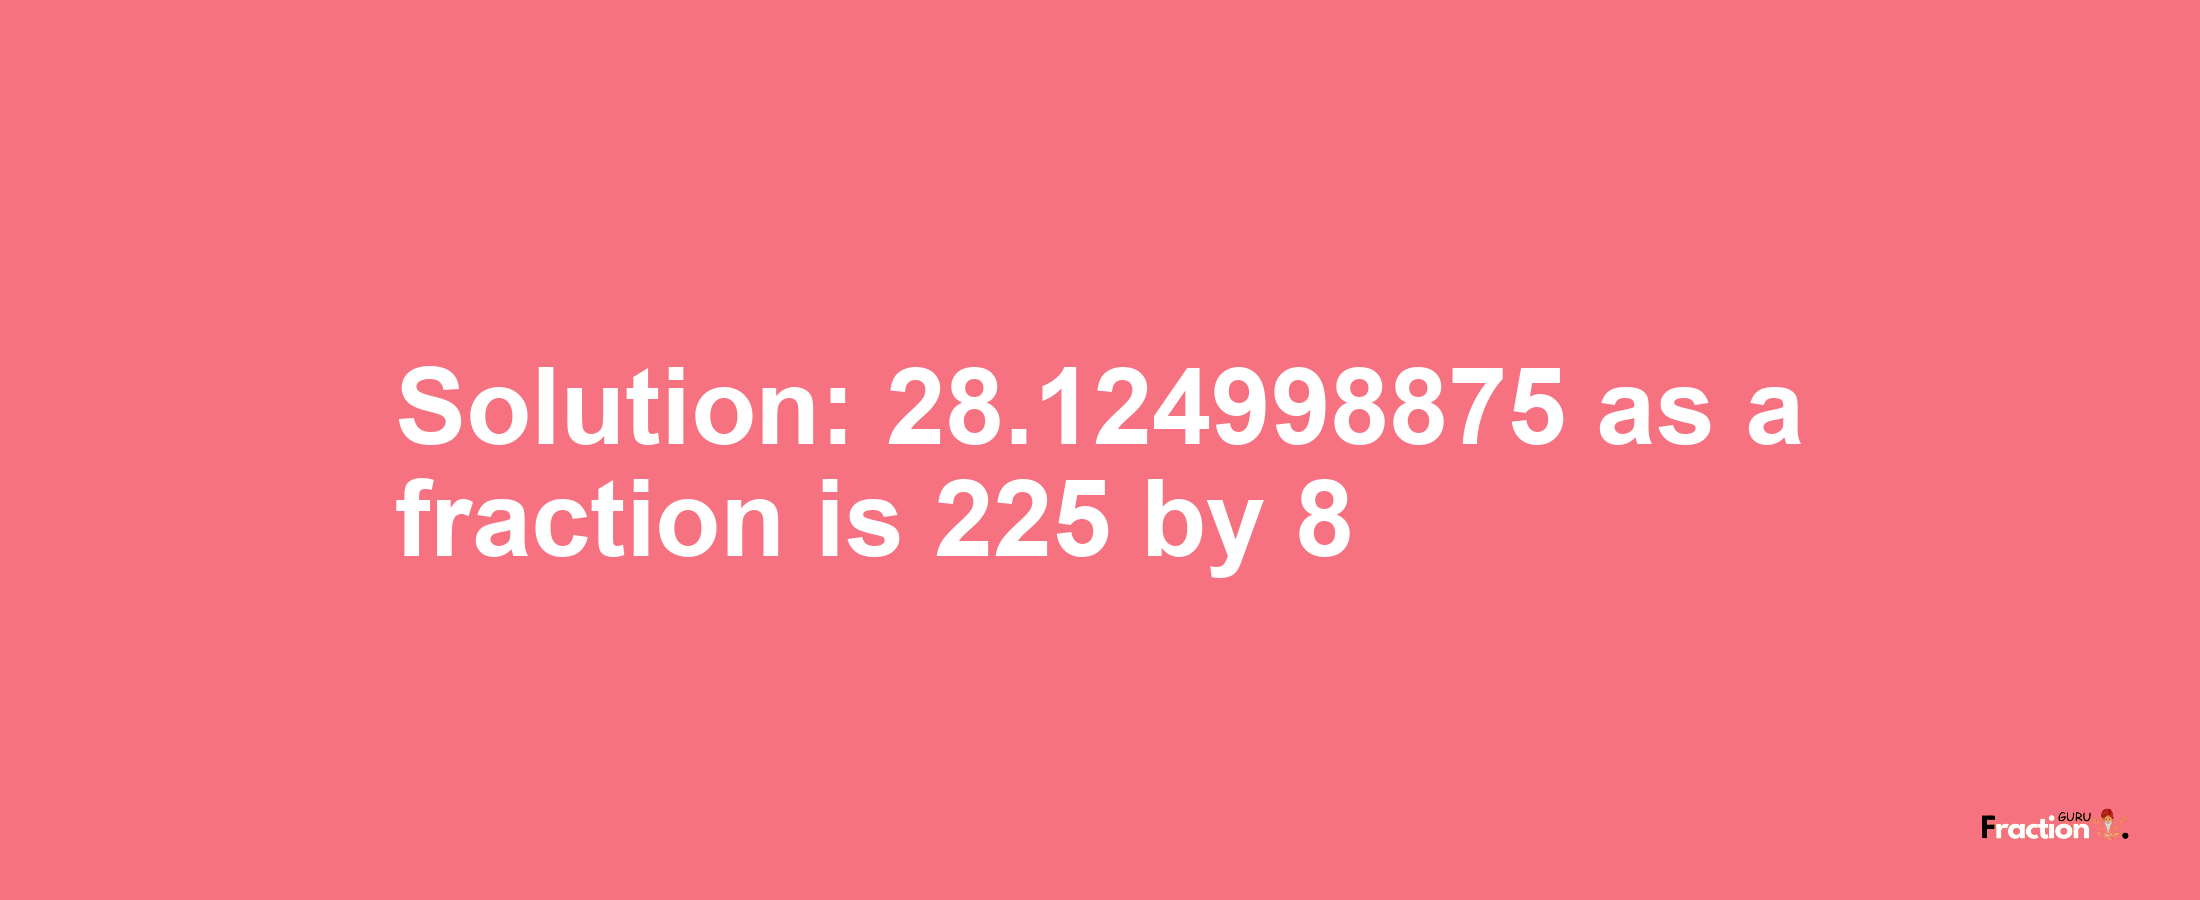 Solution:28.124998875 as a fraction is 225/8